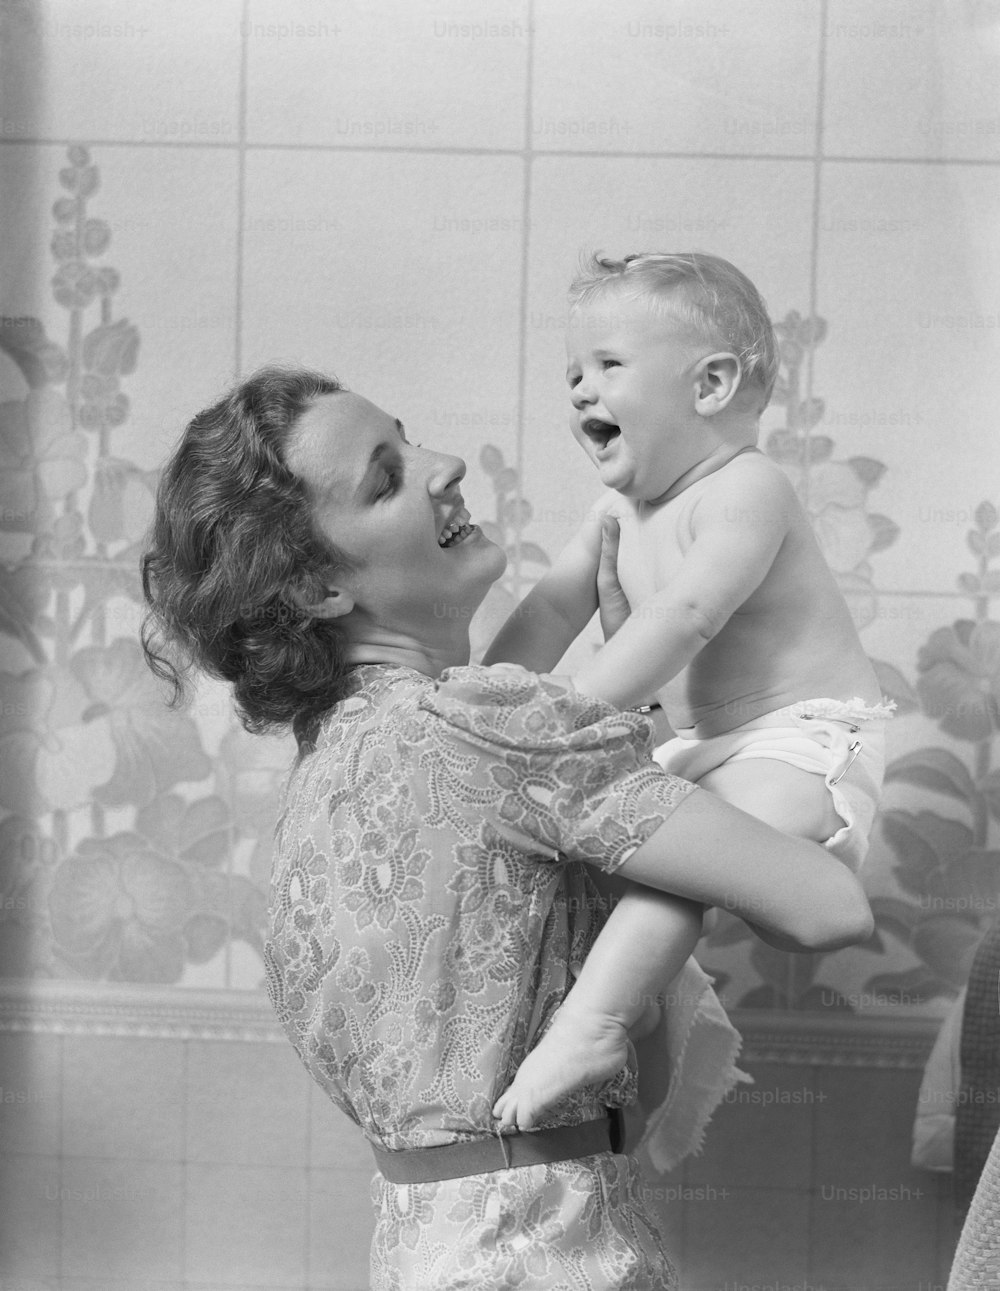 UNITED STATES - CIRCA 1940s:  Smiling mother lifting her crying baby son, looking up at him.